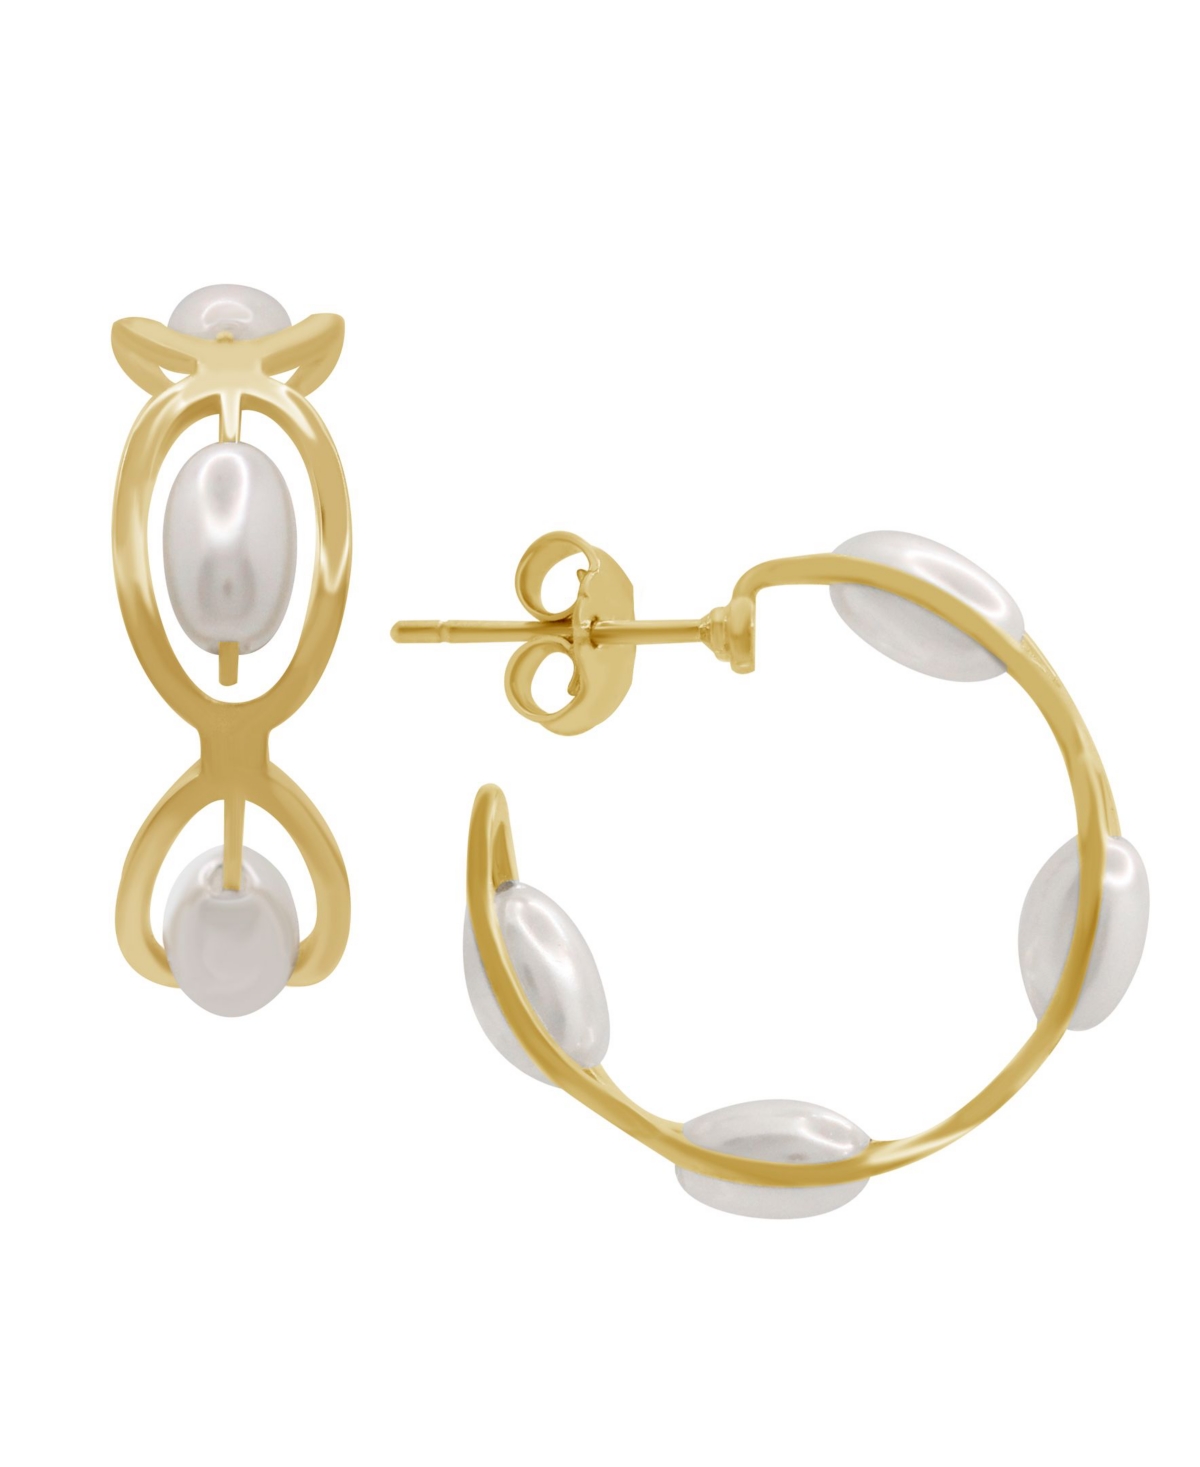 Gold Plated Fancy C Hoop Post Earrings - Gold-Plated